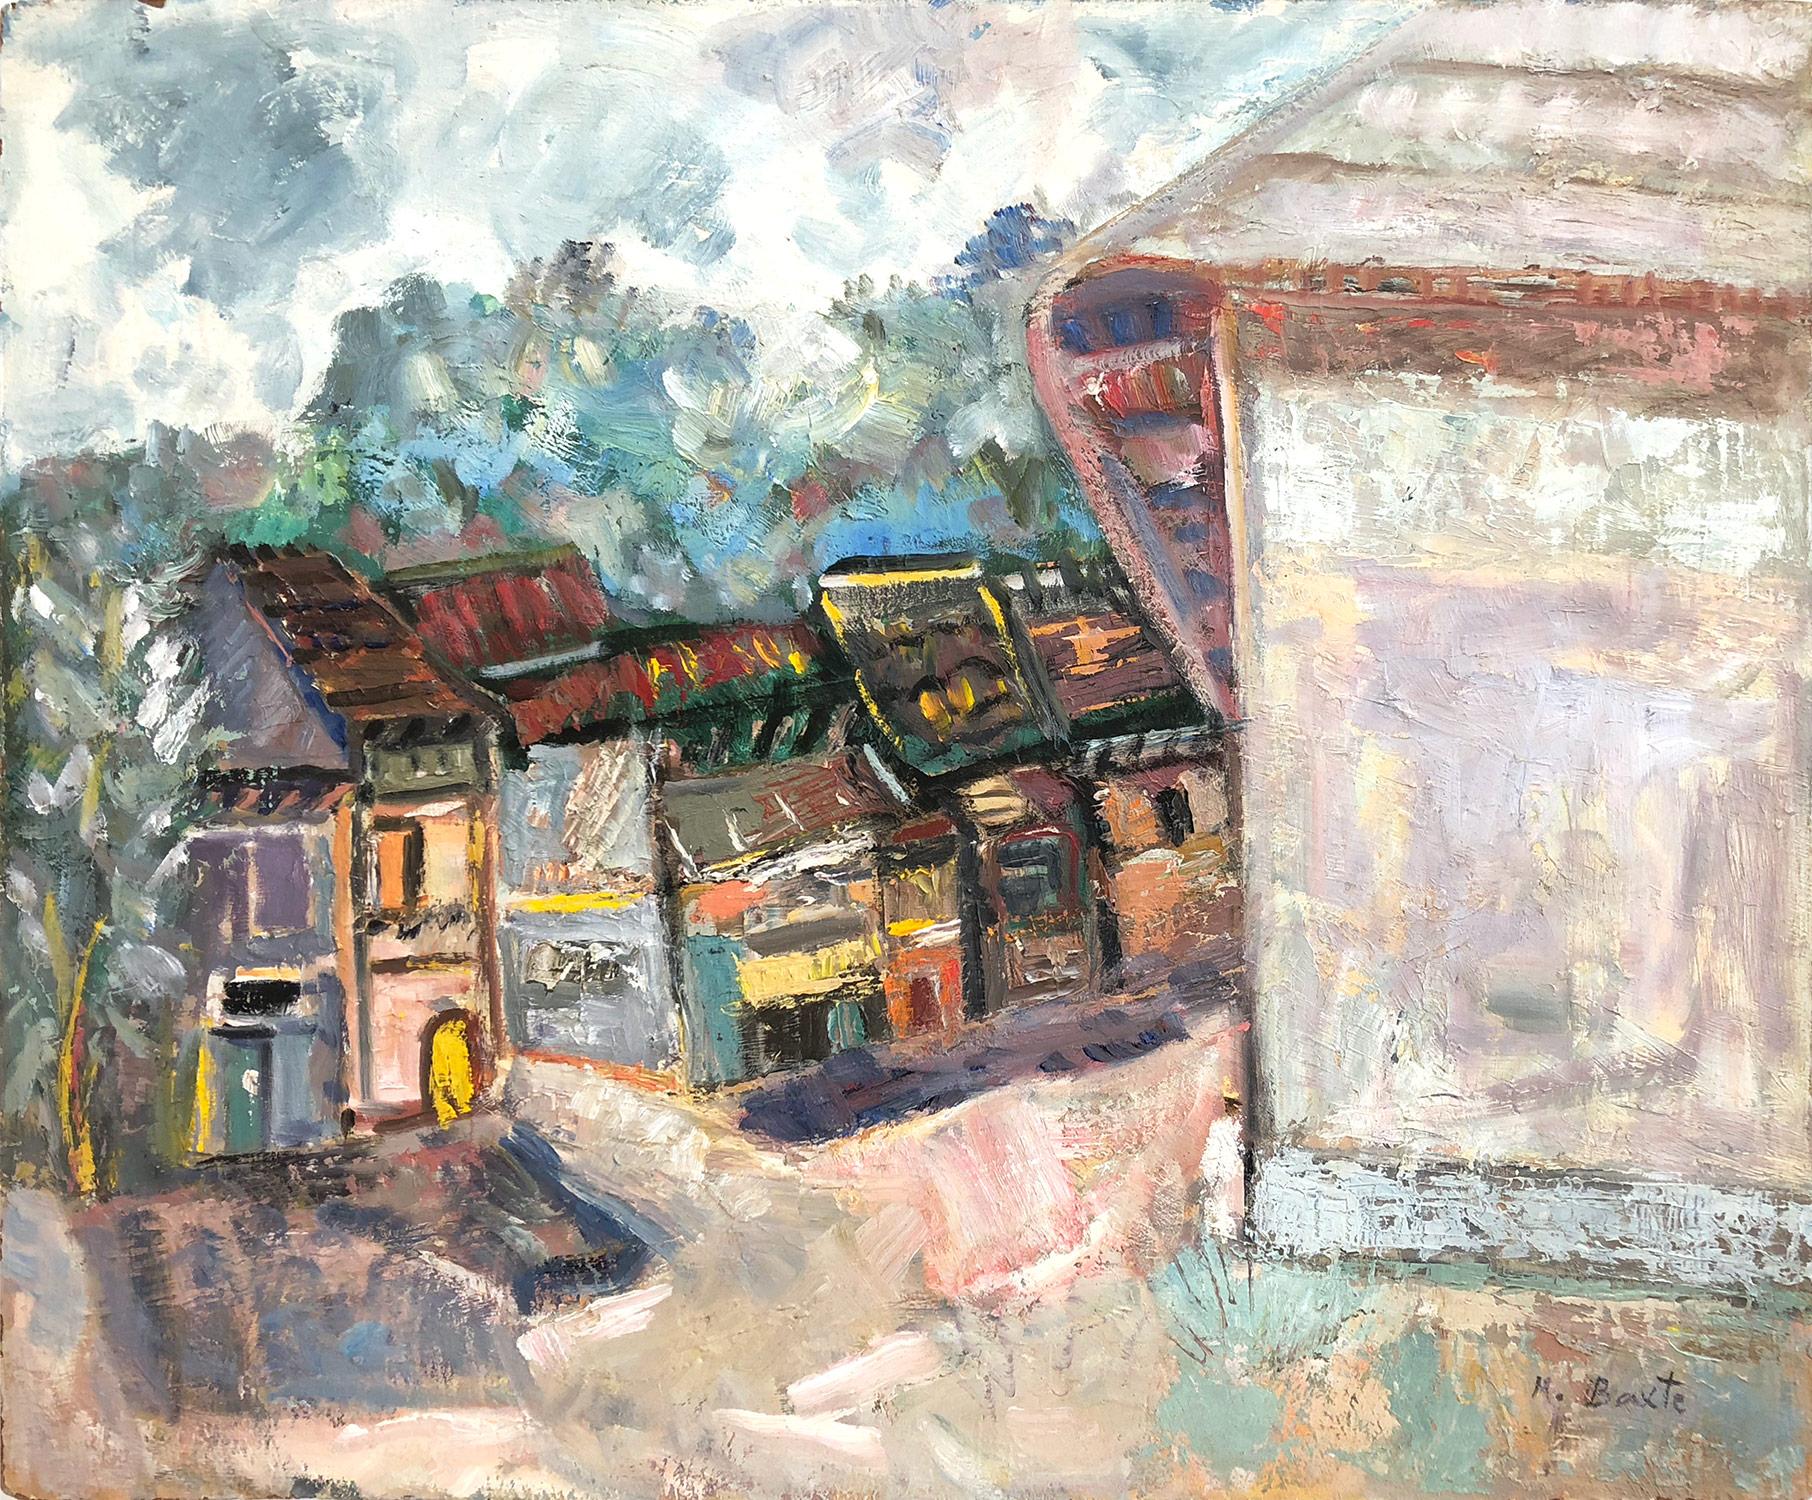 Michael Baxte Landscape Painting - "Colorful Mexican Village Scene" Expressionistic Oil Painting on Masonite